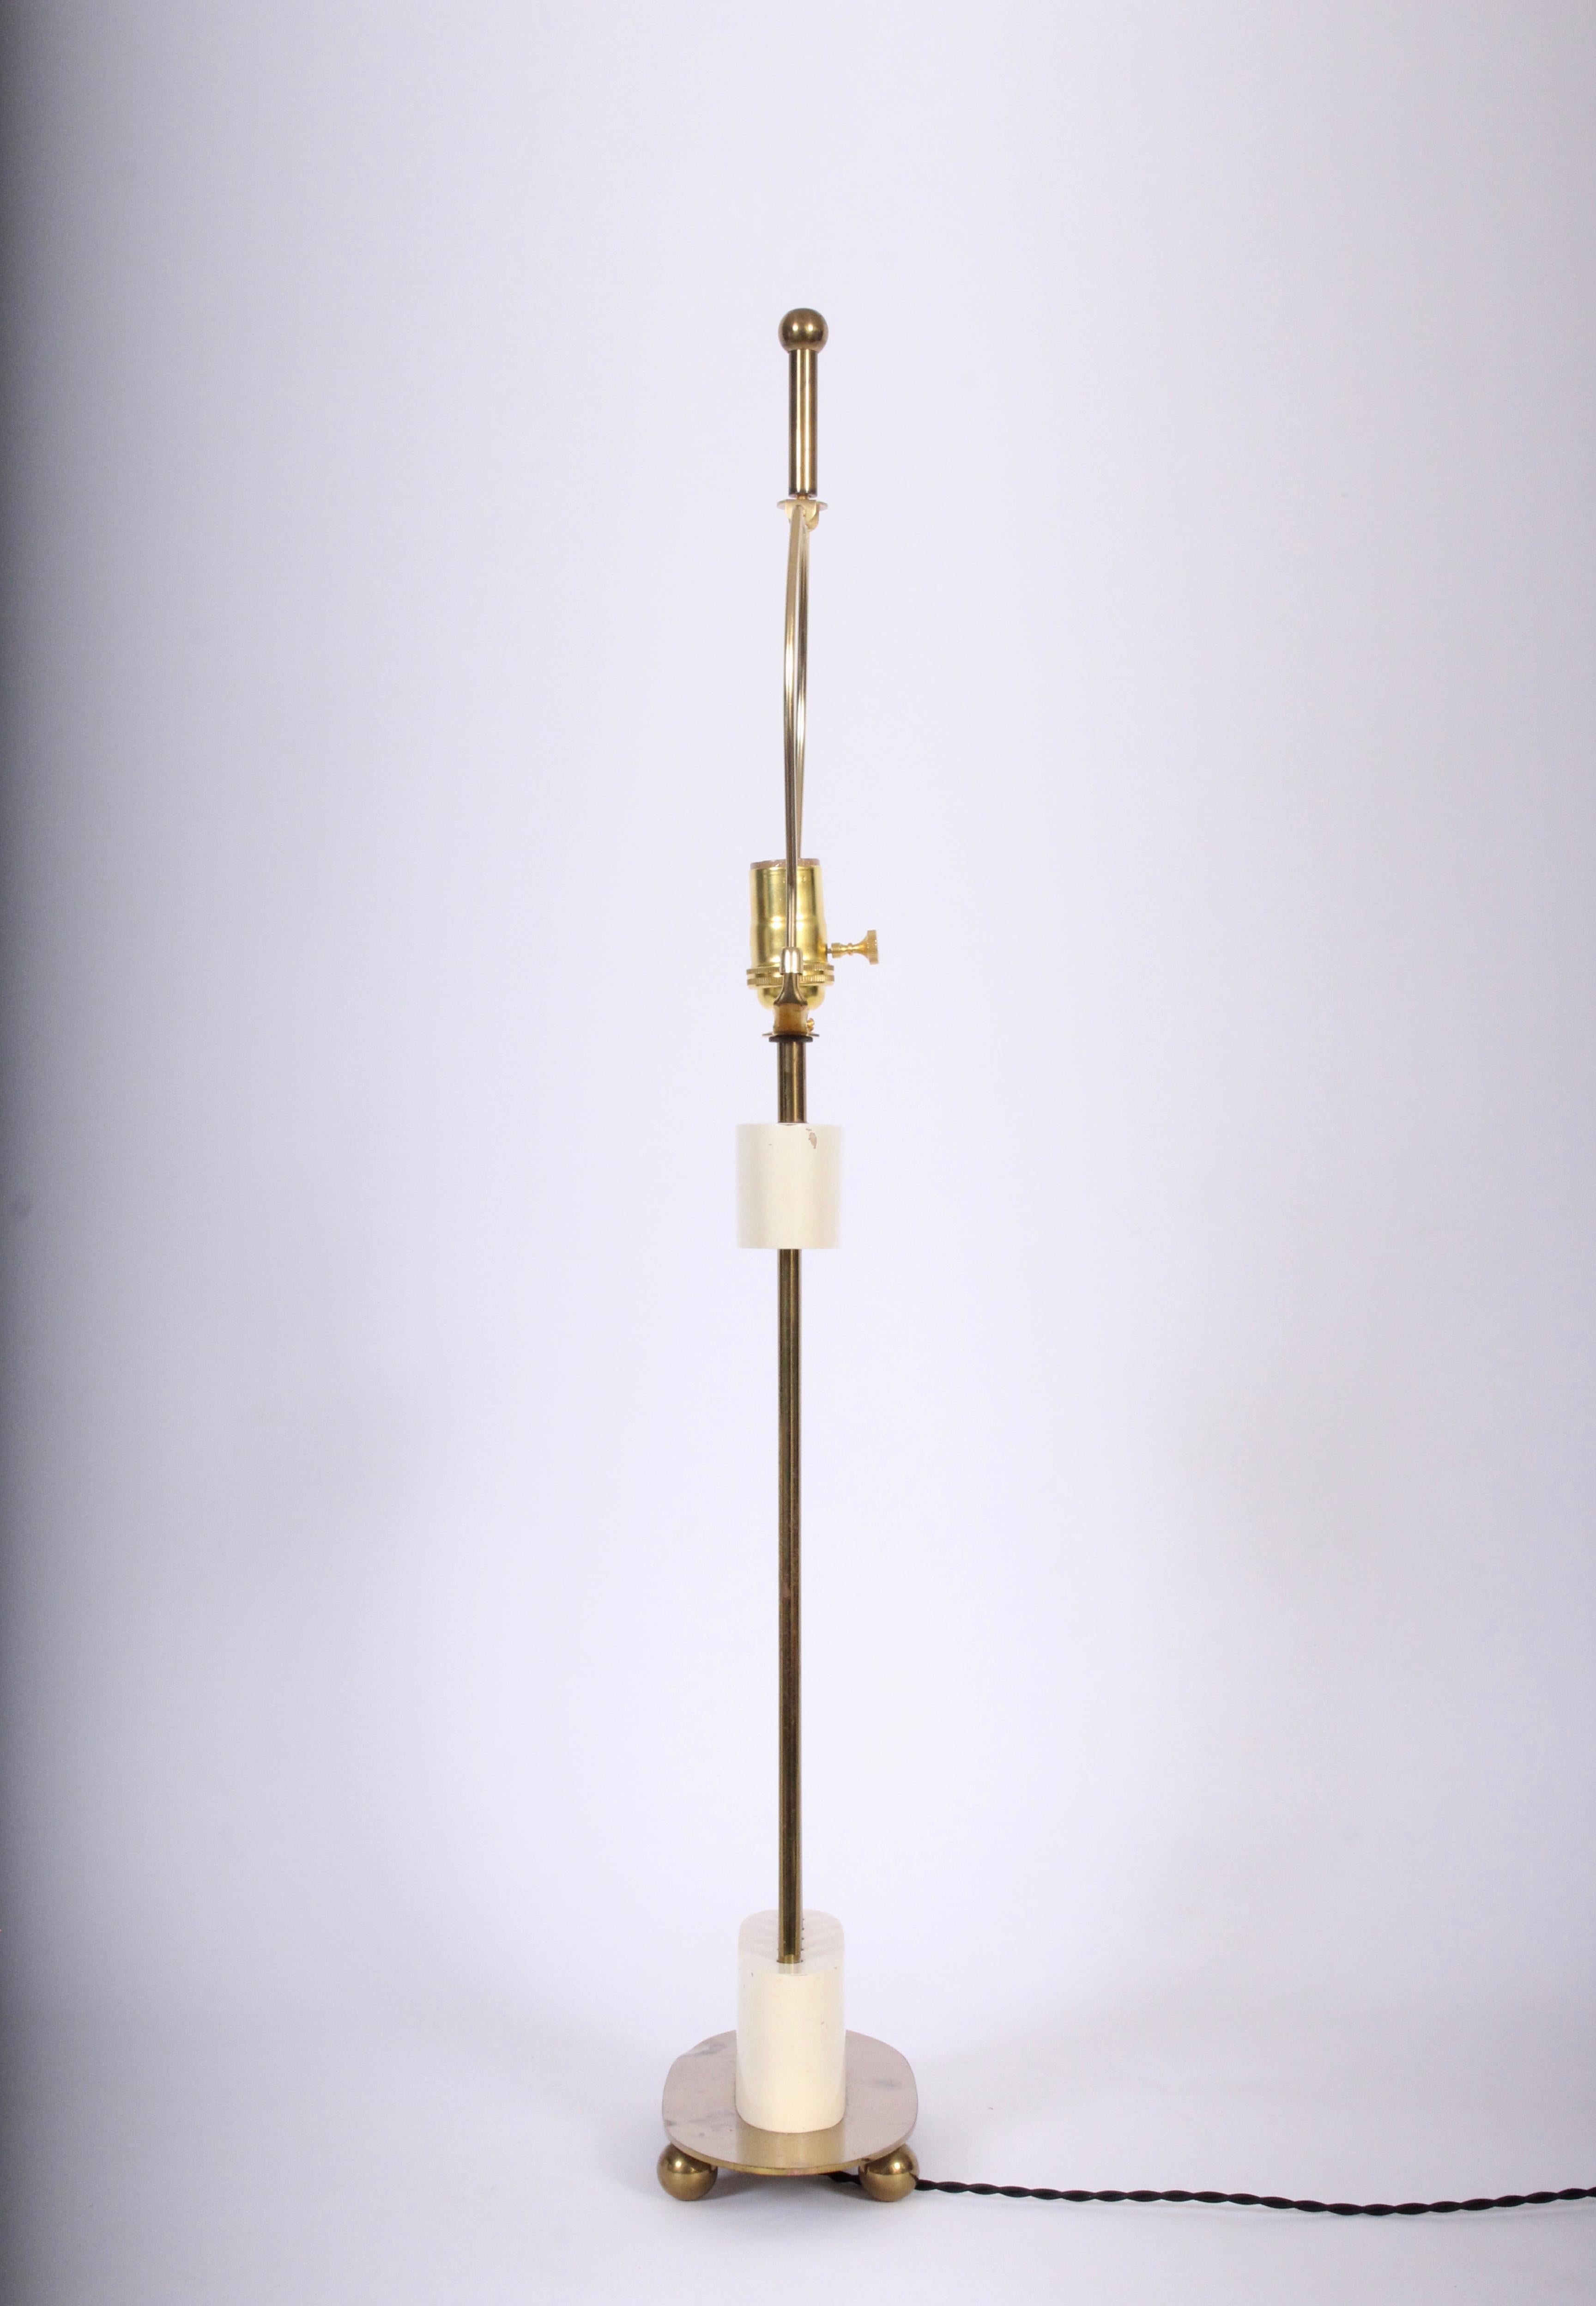 Parzinger Style Mutual Sunset Cream & Brass Spindle Columns Table Lamp, 1950s In Good Condition For Sale In Bainbridge, NY